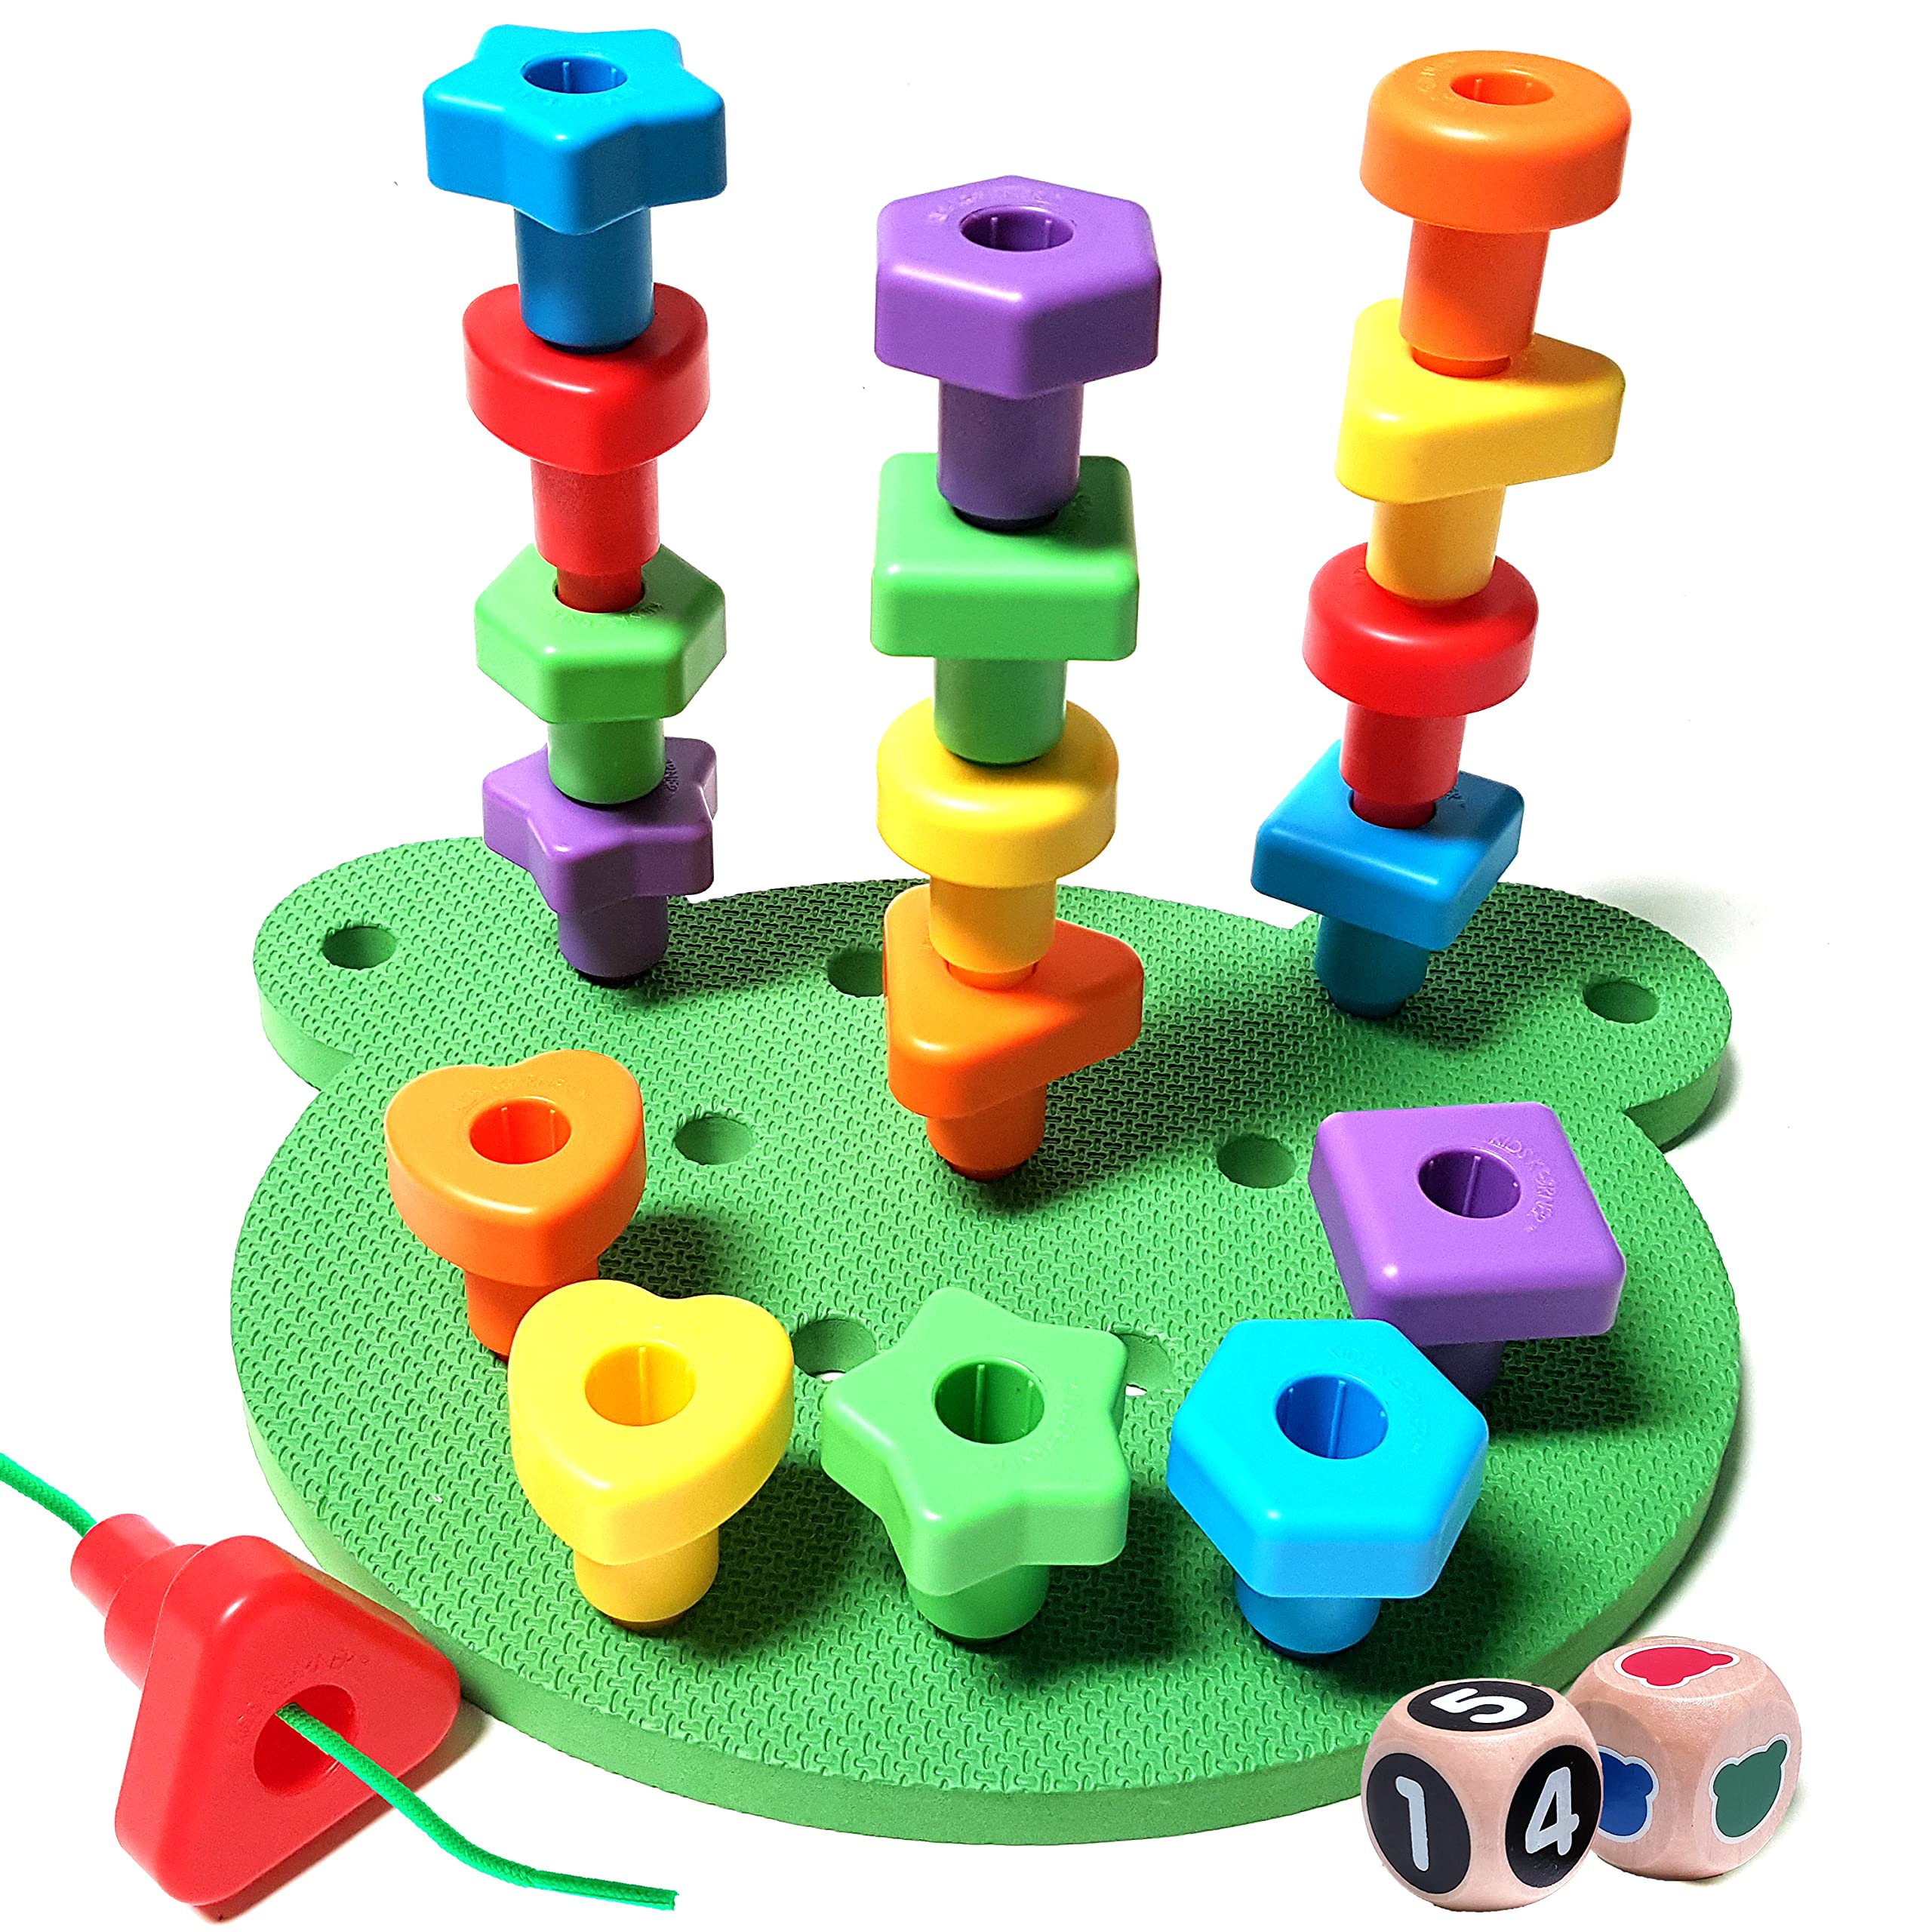 Peg Board Stacking Toddler Toys - Lacing Fine Motor Skills Montessori Toys for 3 4 5 Year Old Girls and Boys | Educational Matching Shapes Kids Toys with Pegs, Activity eBook & Travel Backpack